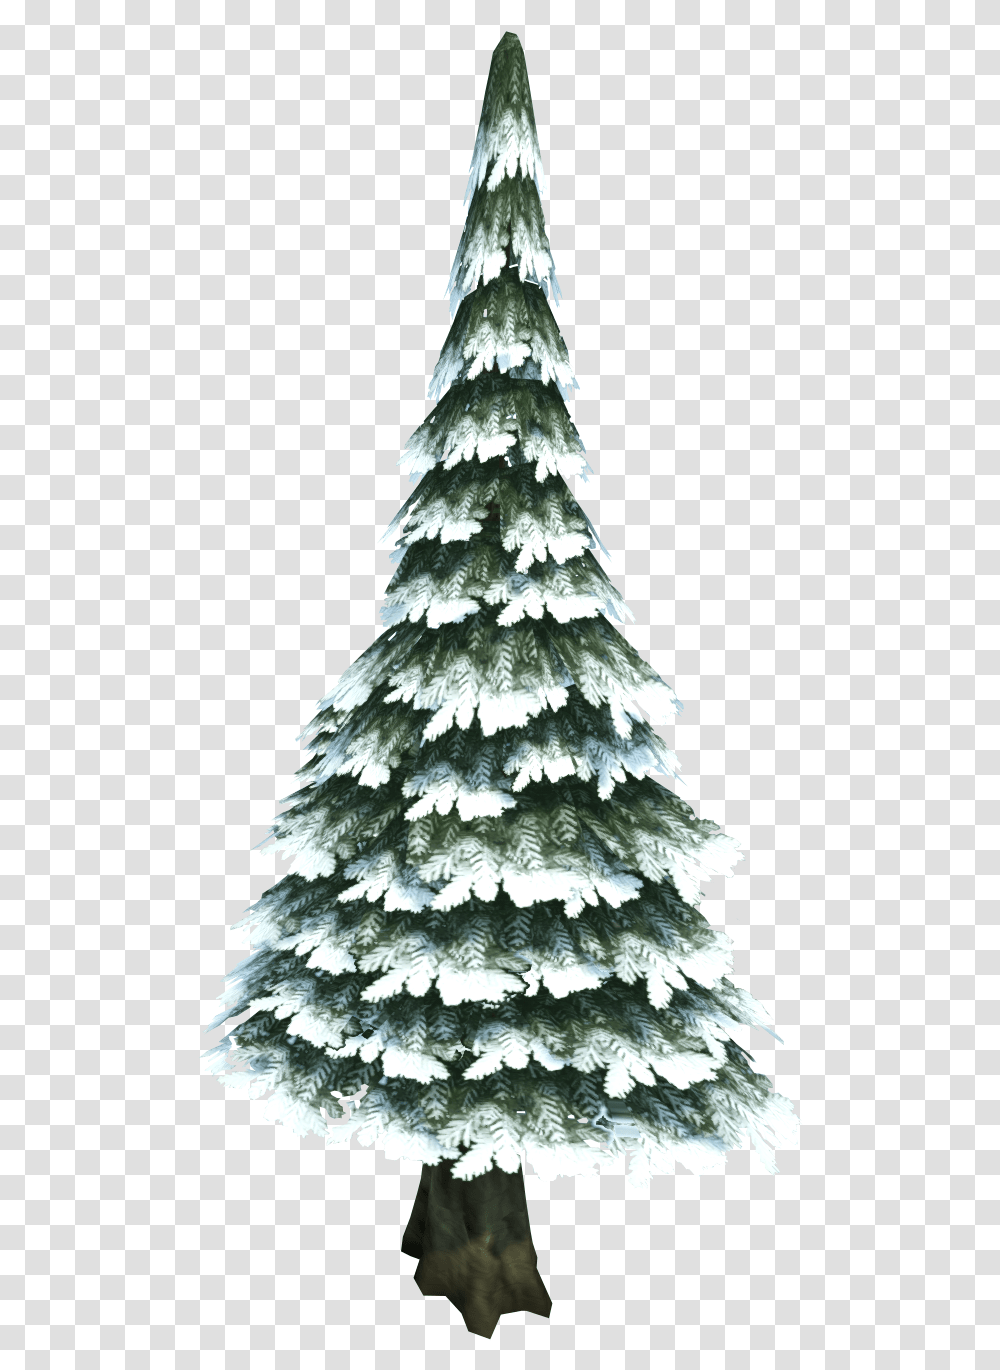 Evergreen Background Snow Pine Tree, Christmas Tree, Ornament, Plant, Fir Transparent Png